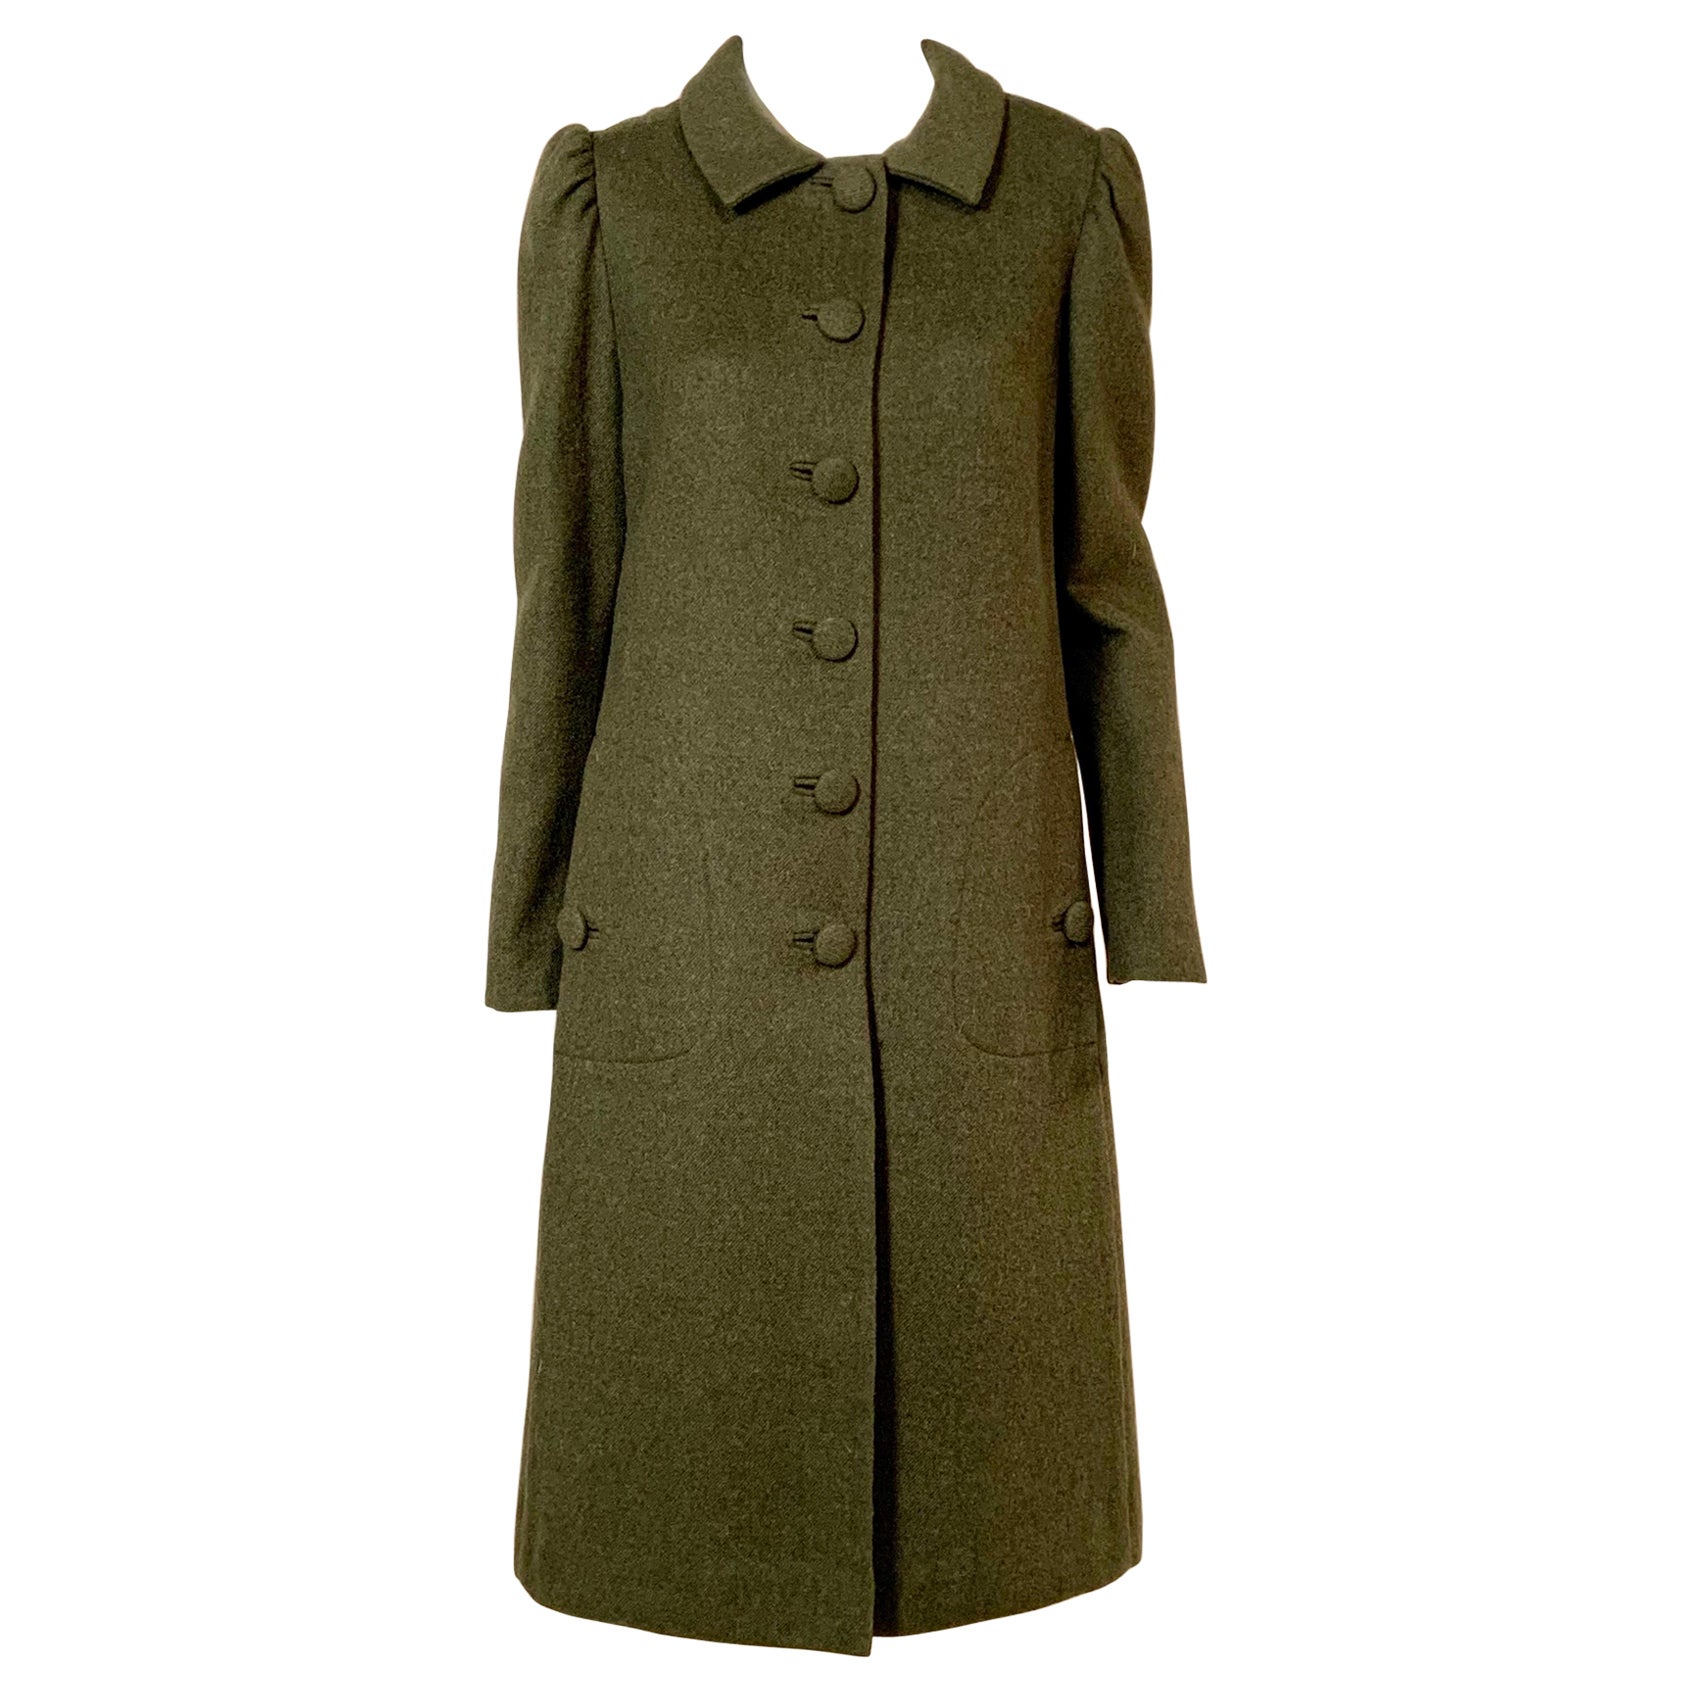 Sybil Connolly Irish Couture Double Faced Loden Green and Plaid Wool Coat For Sale